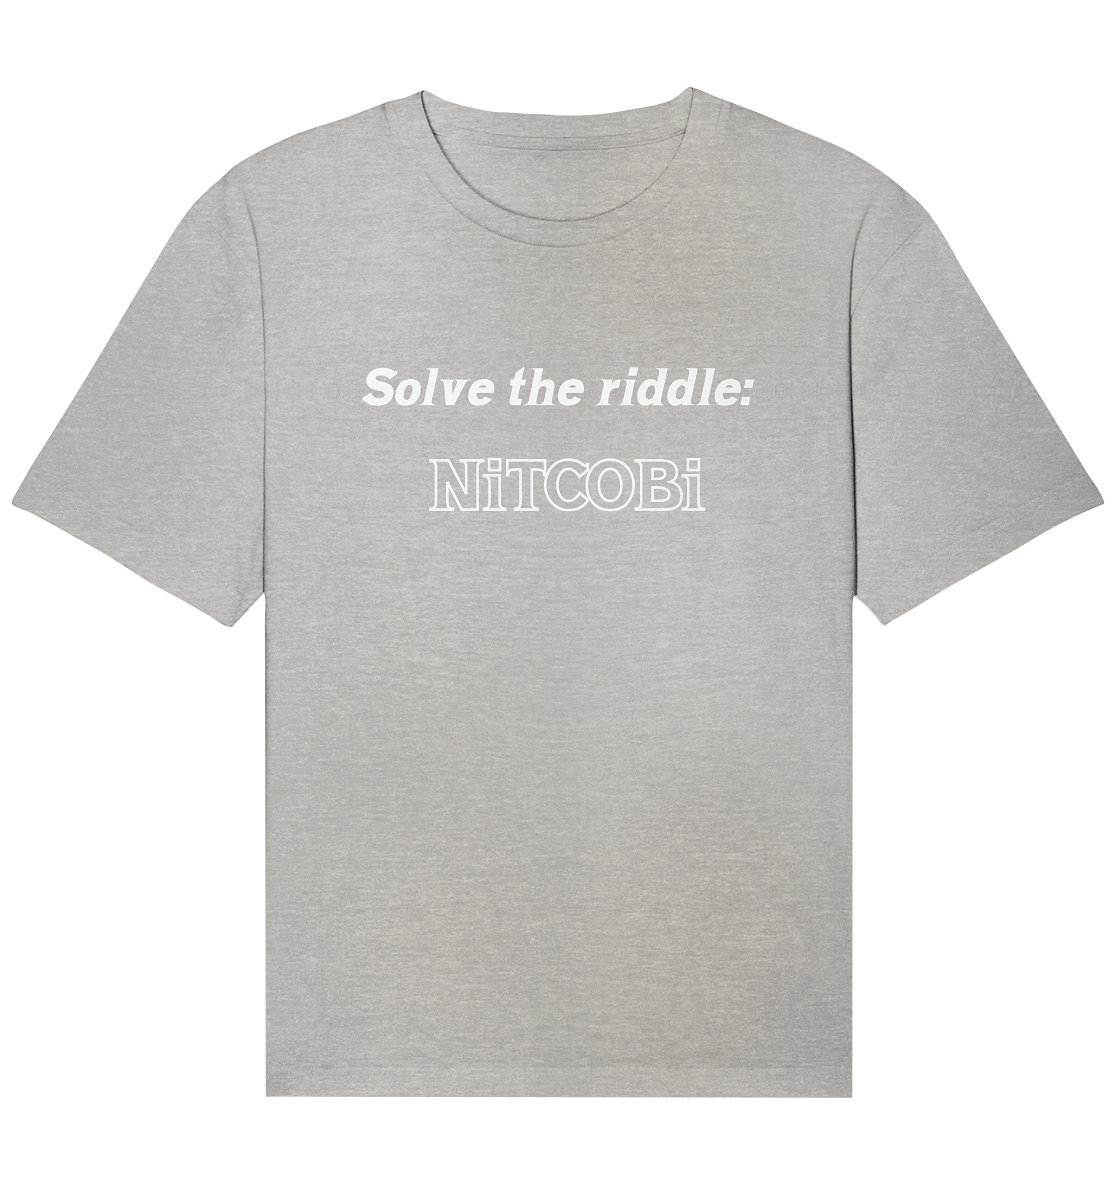 SOLVE THE RIDDLE - NiTCOBi - Organic Relaxed Shirt